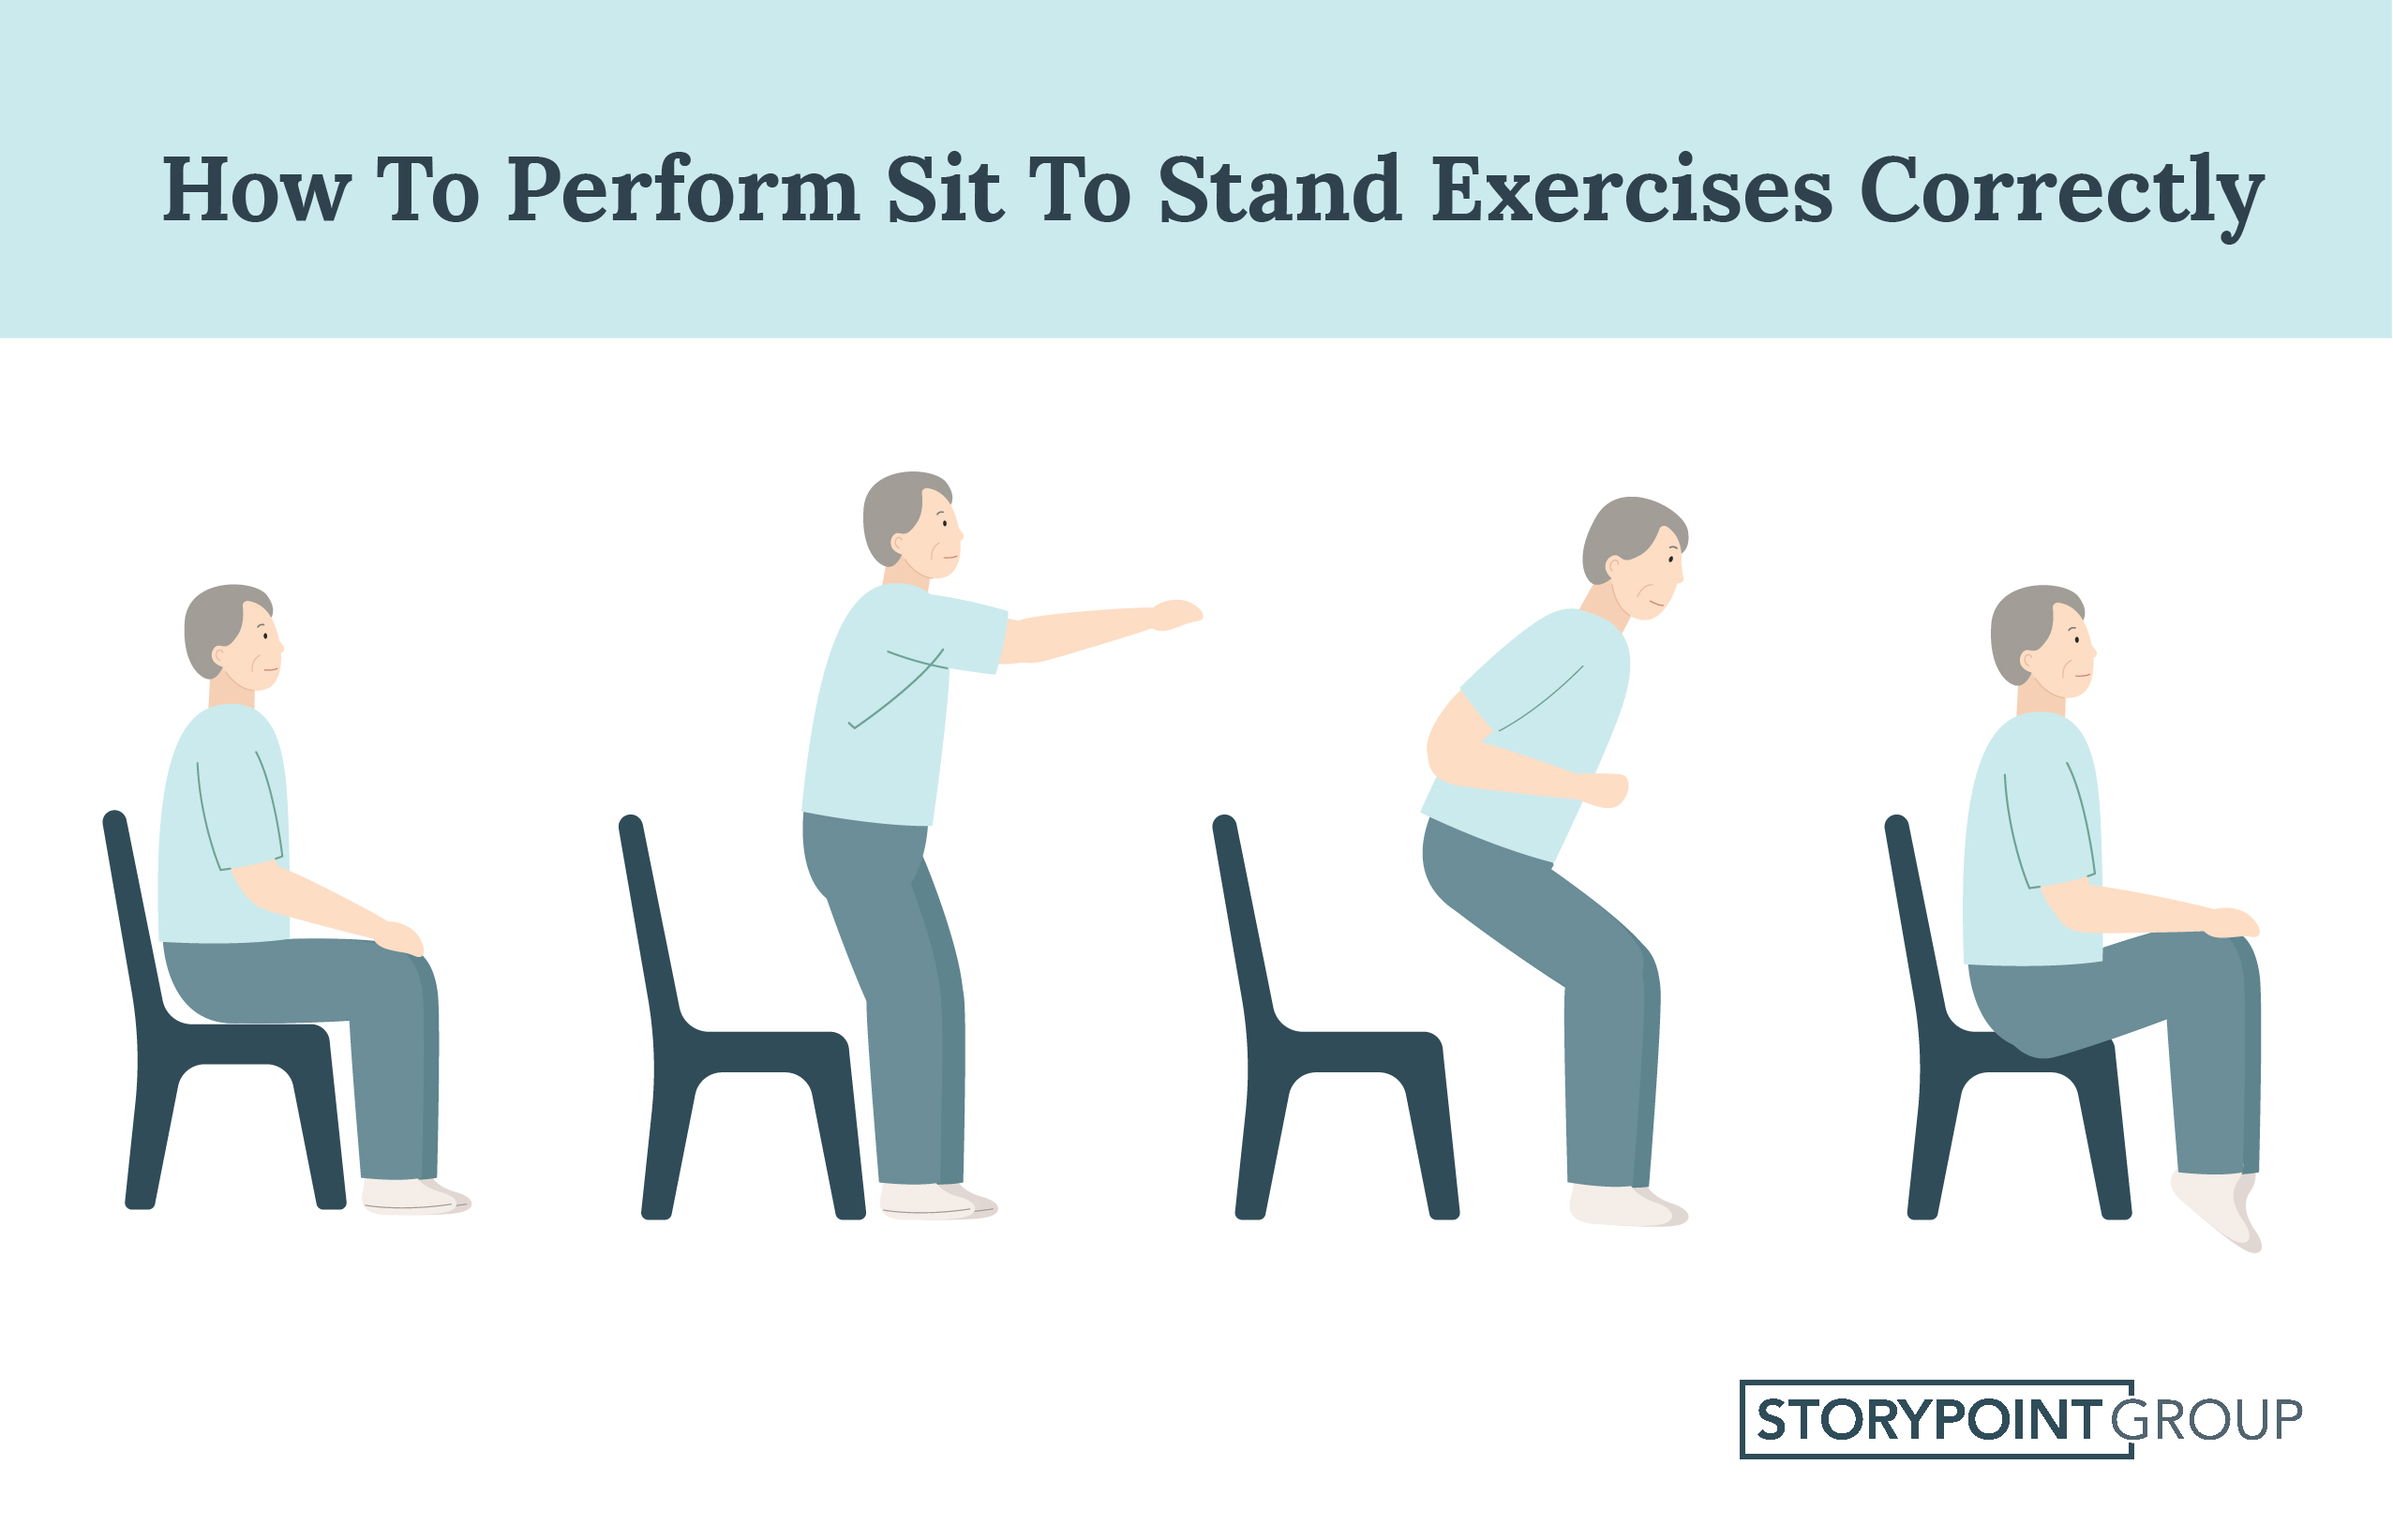 StoryPoint Group sit to stand exercise guide